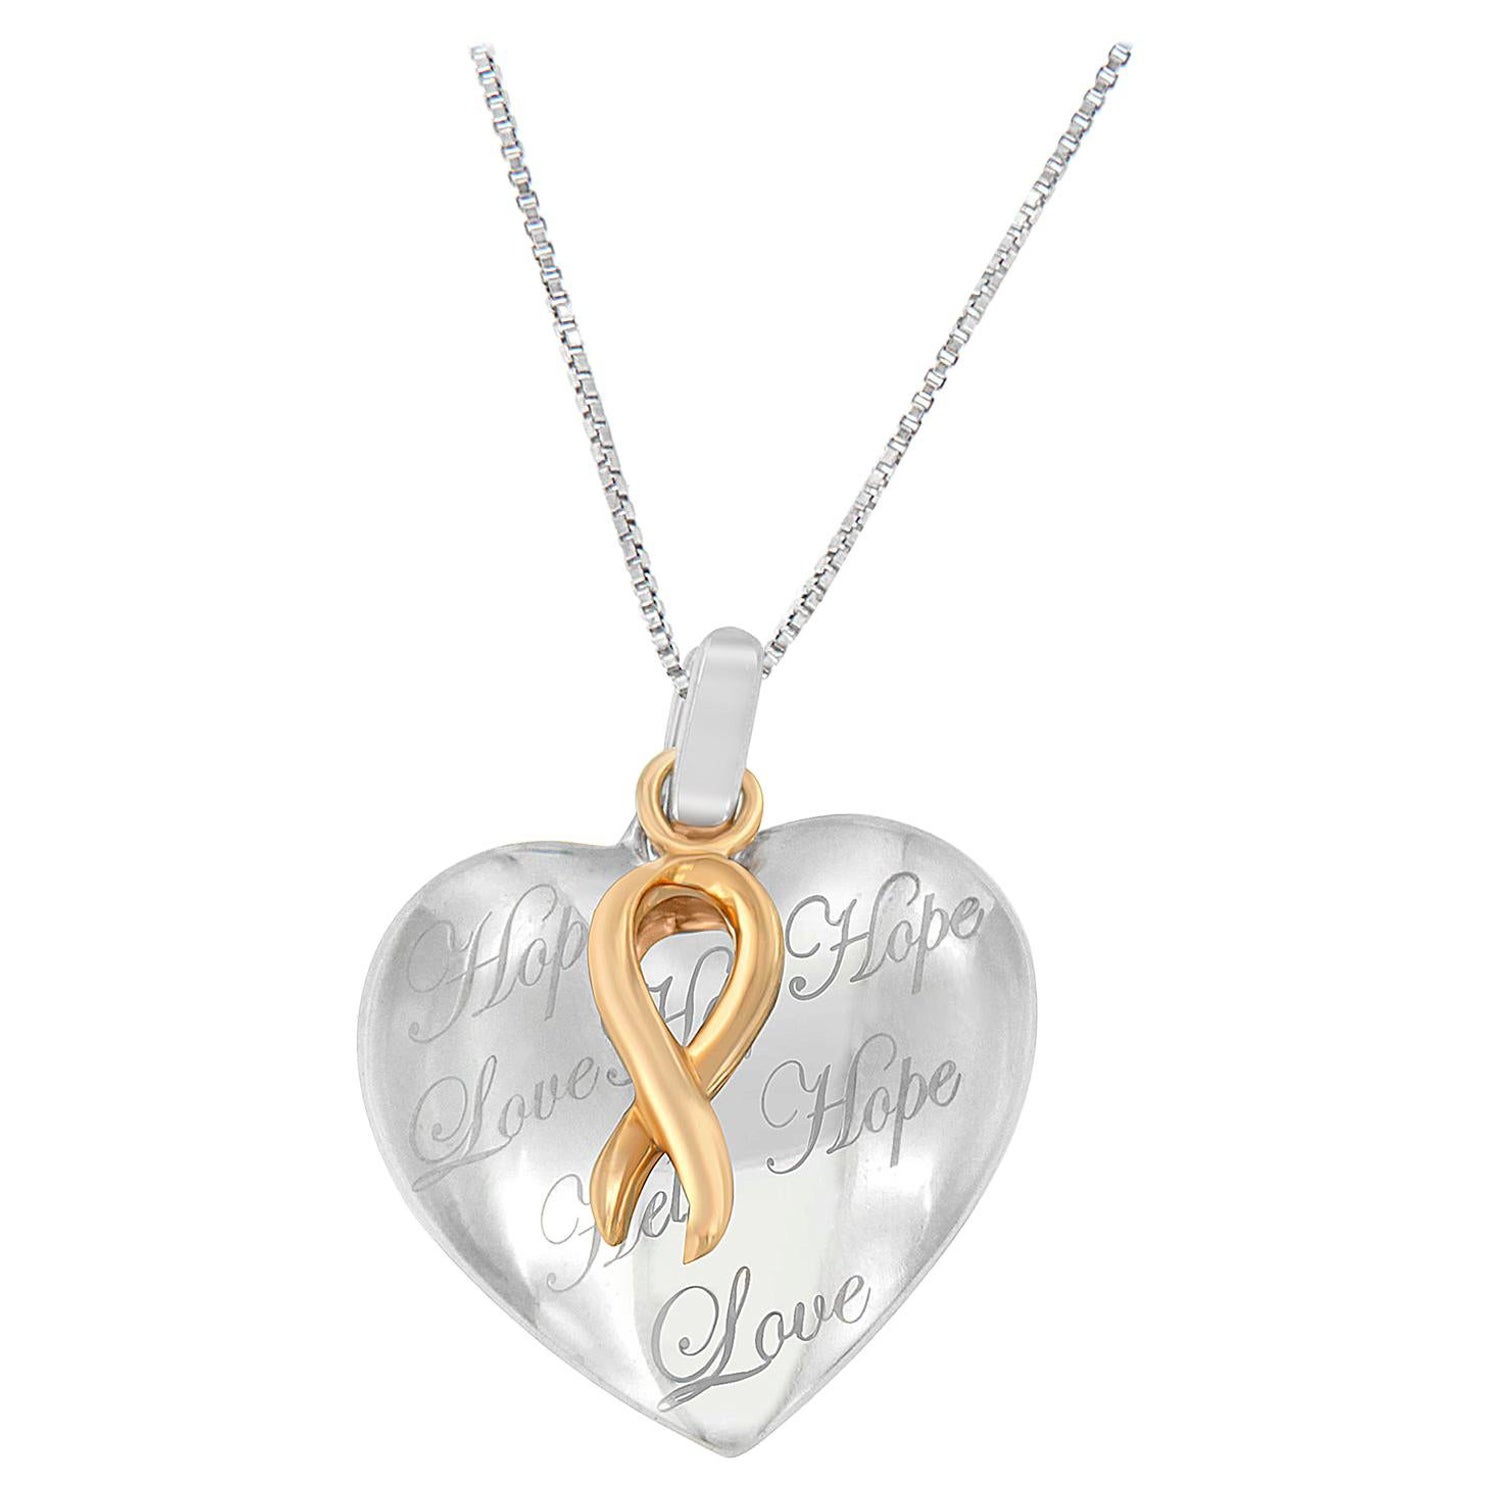 10k Gold Over Silver Heart Pendant Necklace For Sale